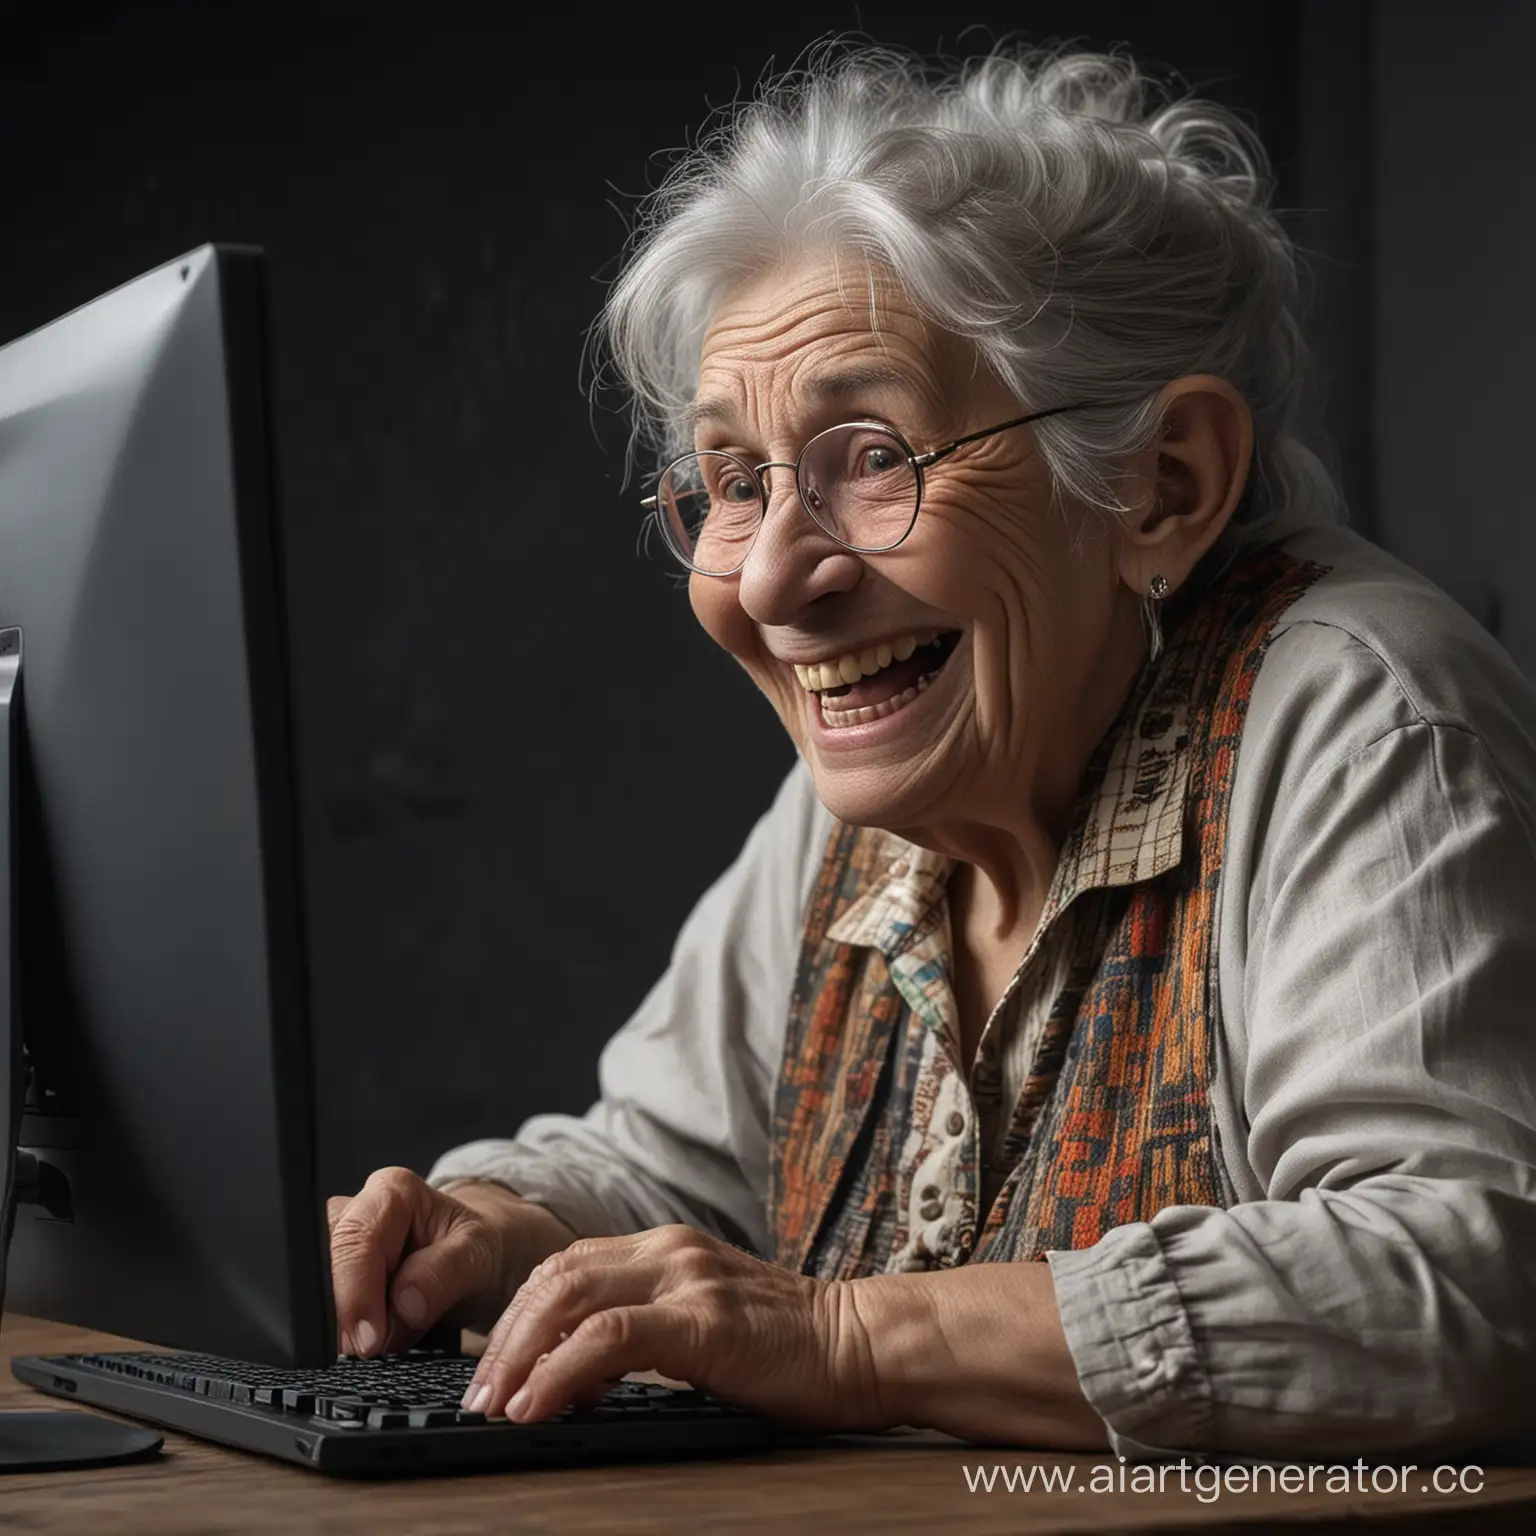 Mischievous-Old-Troll-Grandma-Laughing-at-Forum-Users